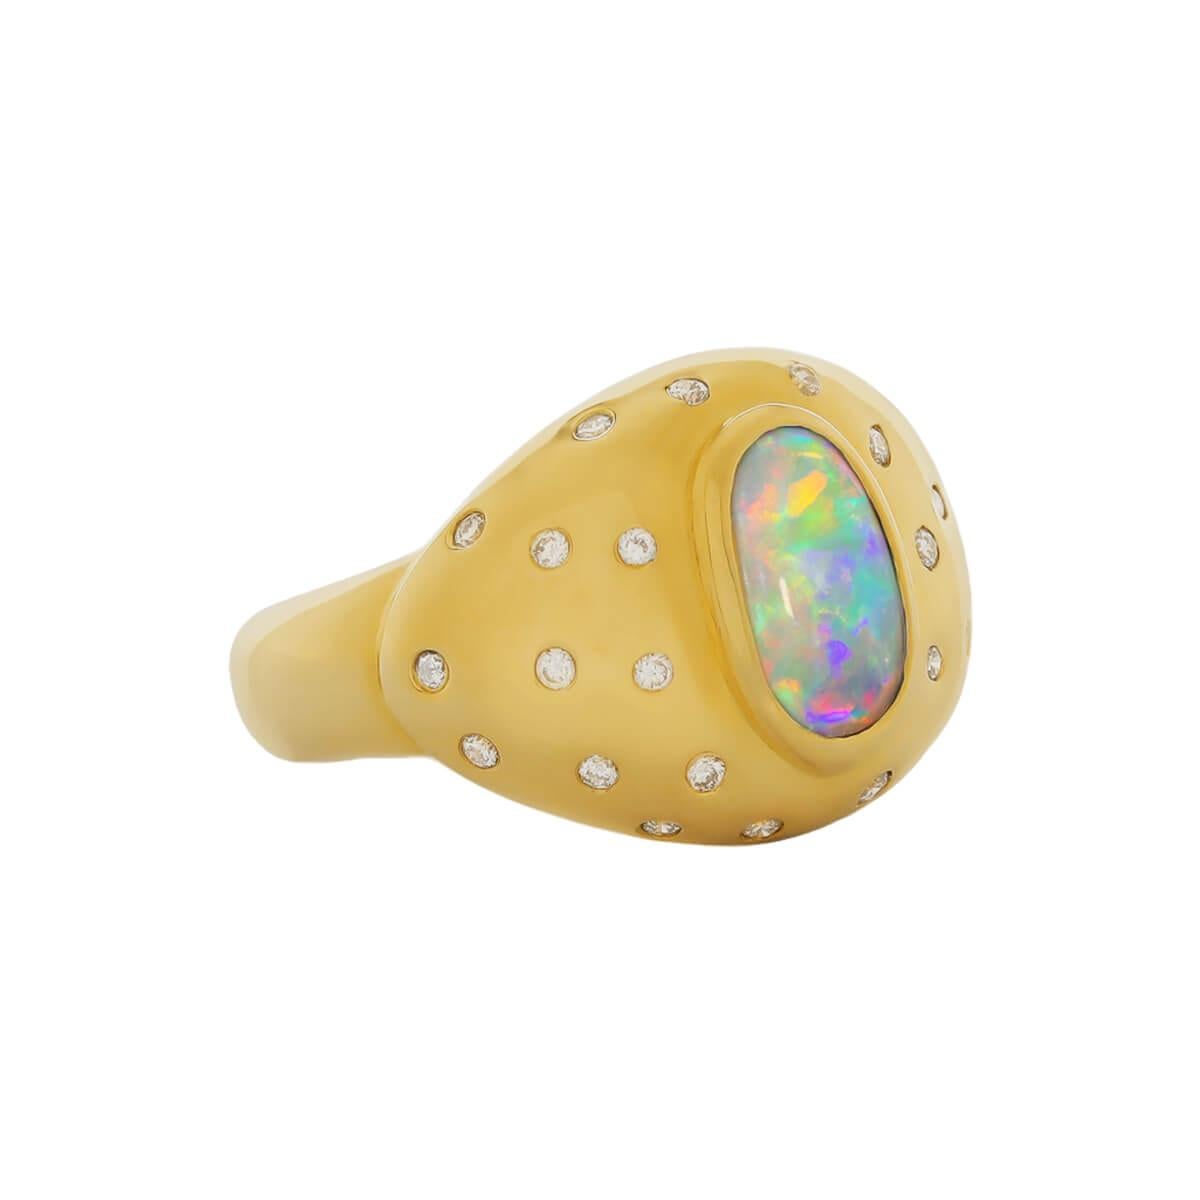 SPECIFICATIONS
Opal Type: Dark Crystal Opal
Opal Weight: 1.35ct
Opal Origin: Lightning Ridge, NSW, Australia
Diamonds: 0.27ct D IF - F VVS
Metals: 18K solid Gold
Ring Size: Resized to fit you perfectly.

THE GRYFFIN OPAL DIFFERENCE
By investing in